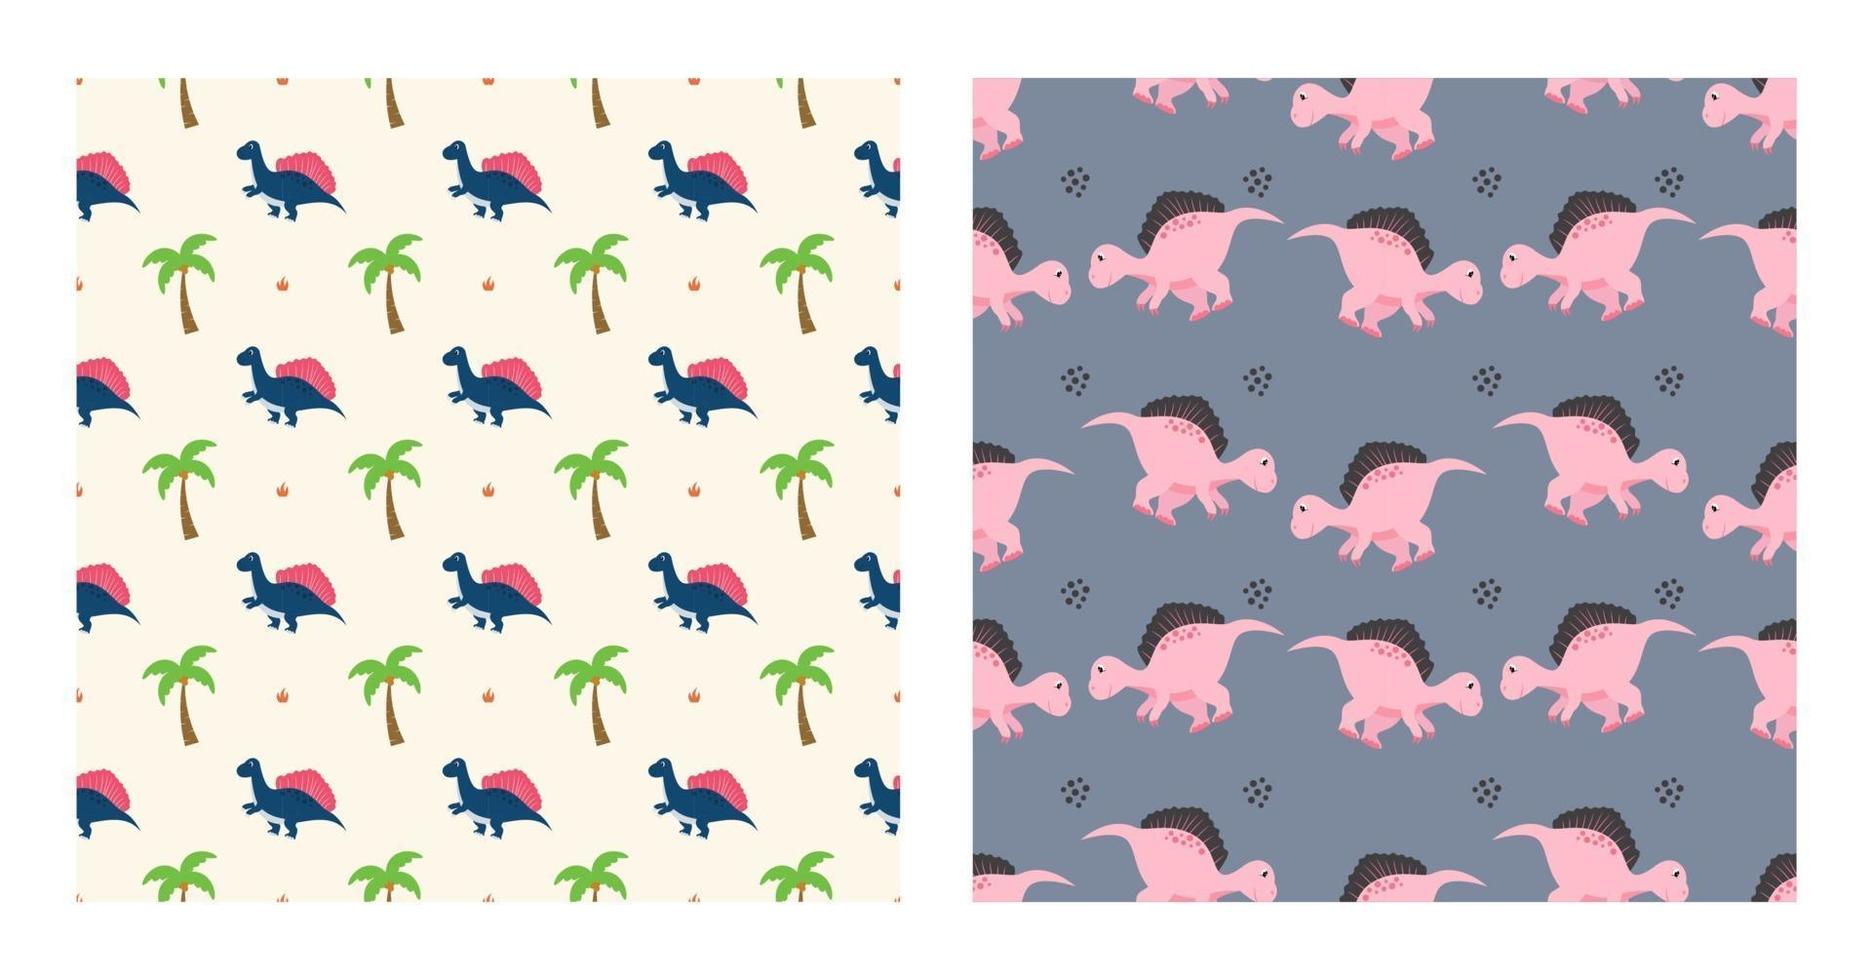 Cute Cartoon Characters Stegosaurus Dinosaurs With Seamless Pattern To Wallpaper Background, Posters, or Banner Template. Vector Illustration